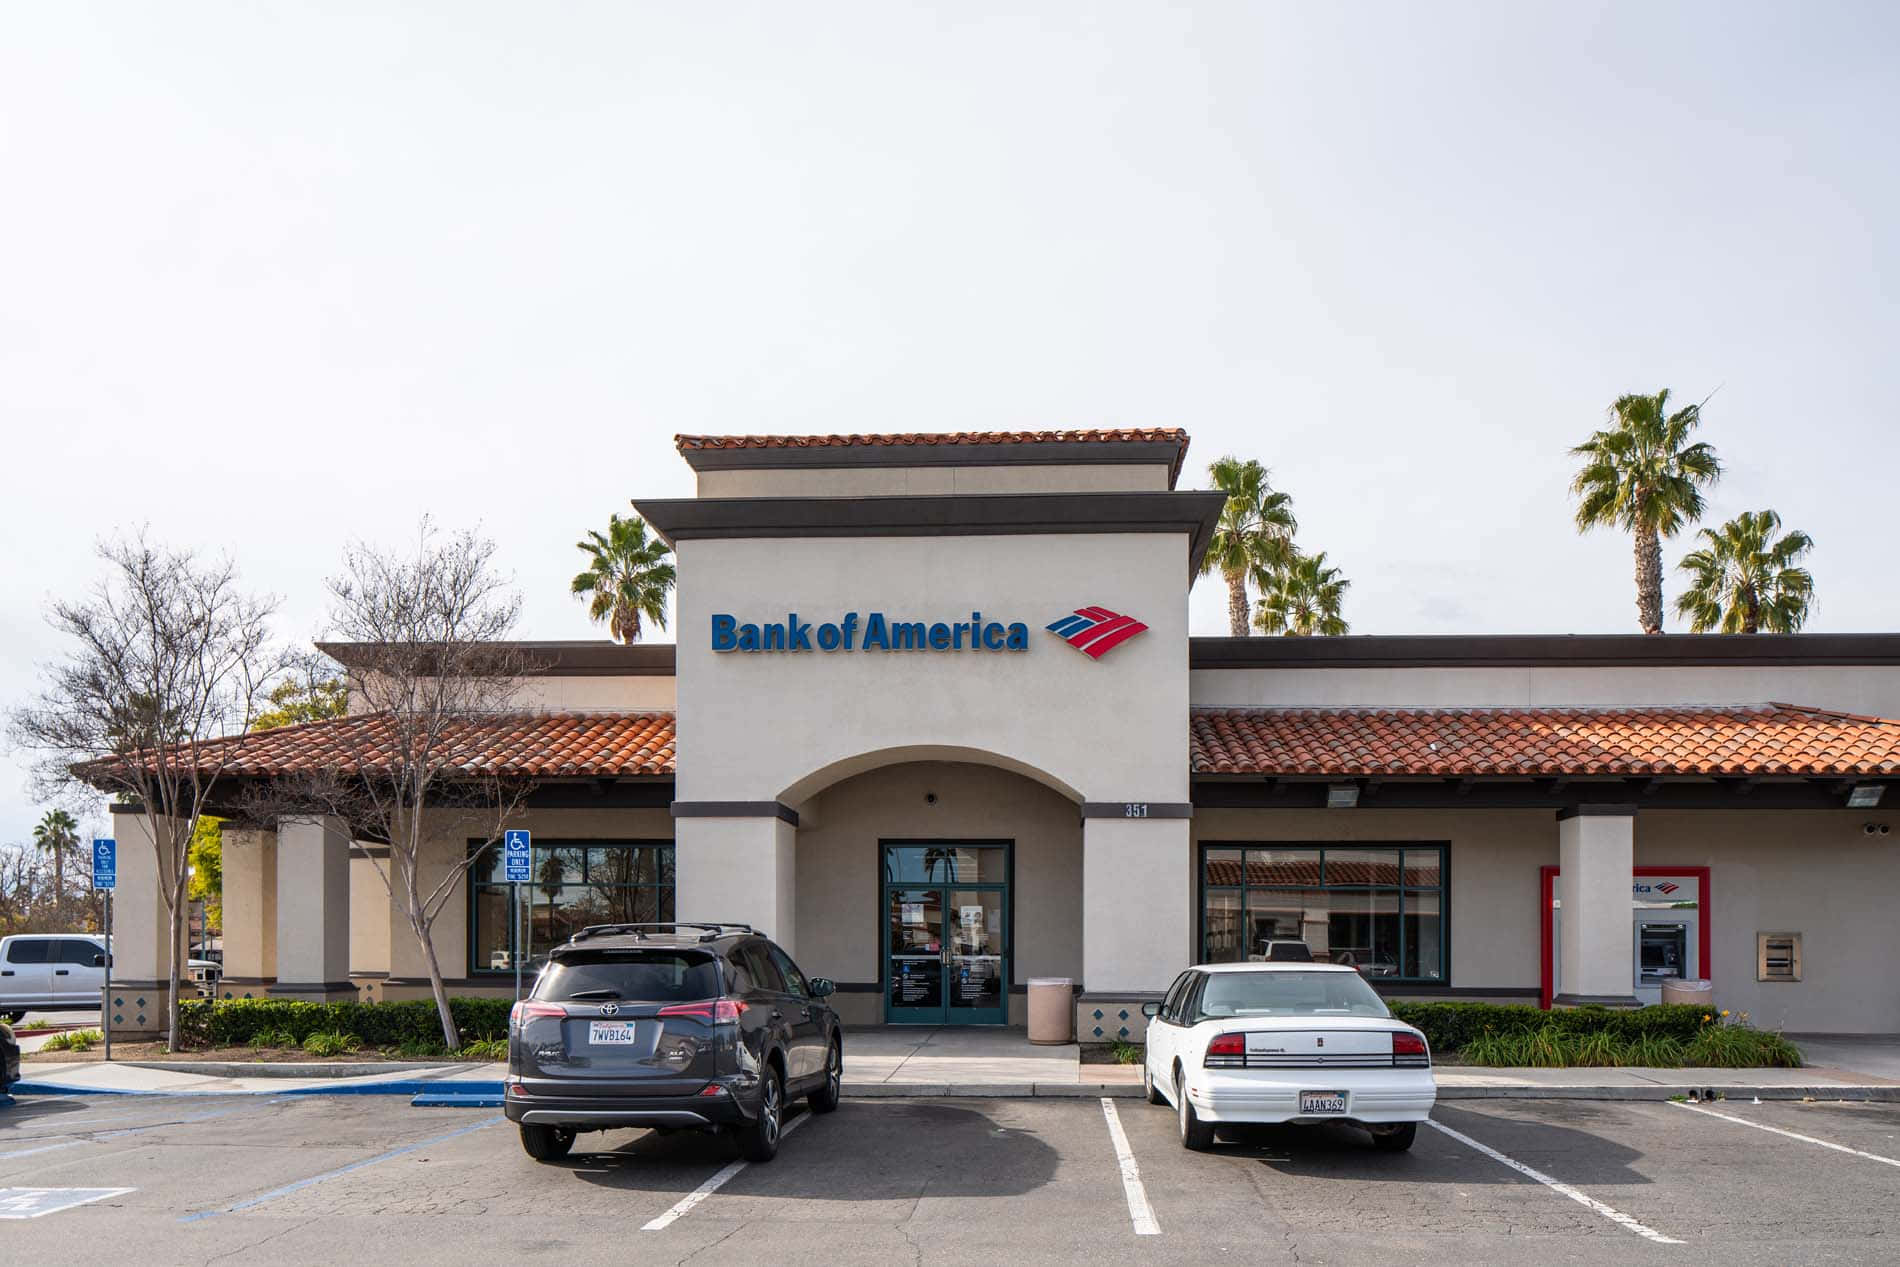 Bank Of America - Moving Ahead of Financial Challenges